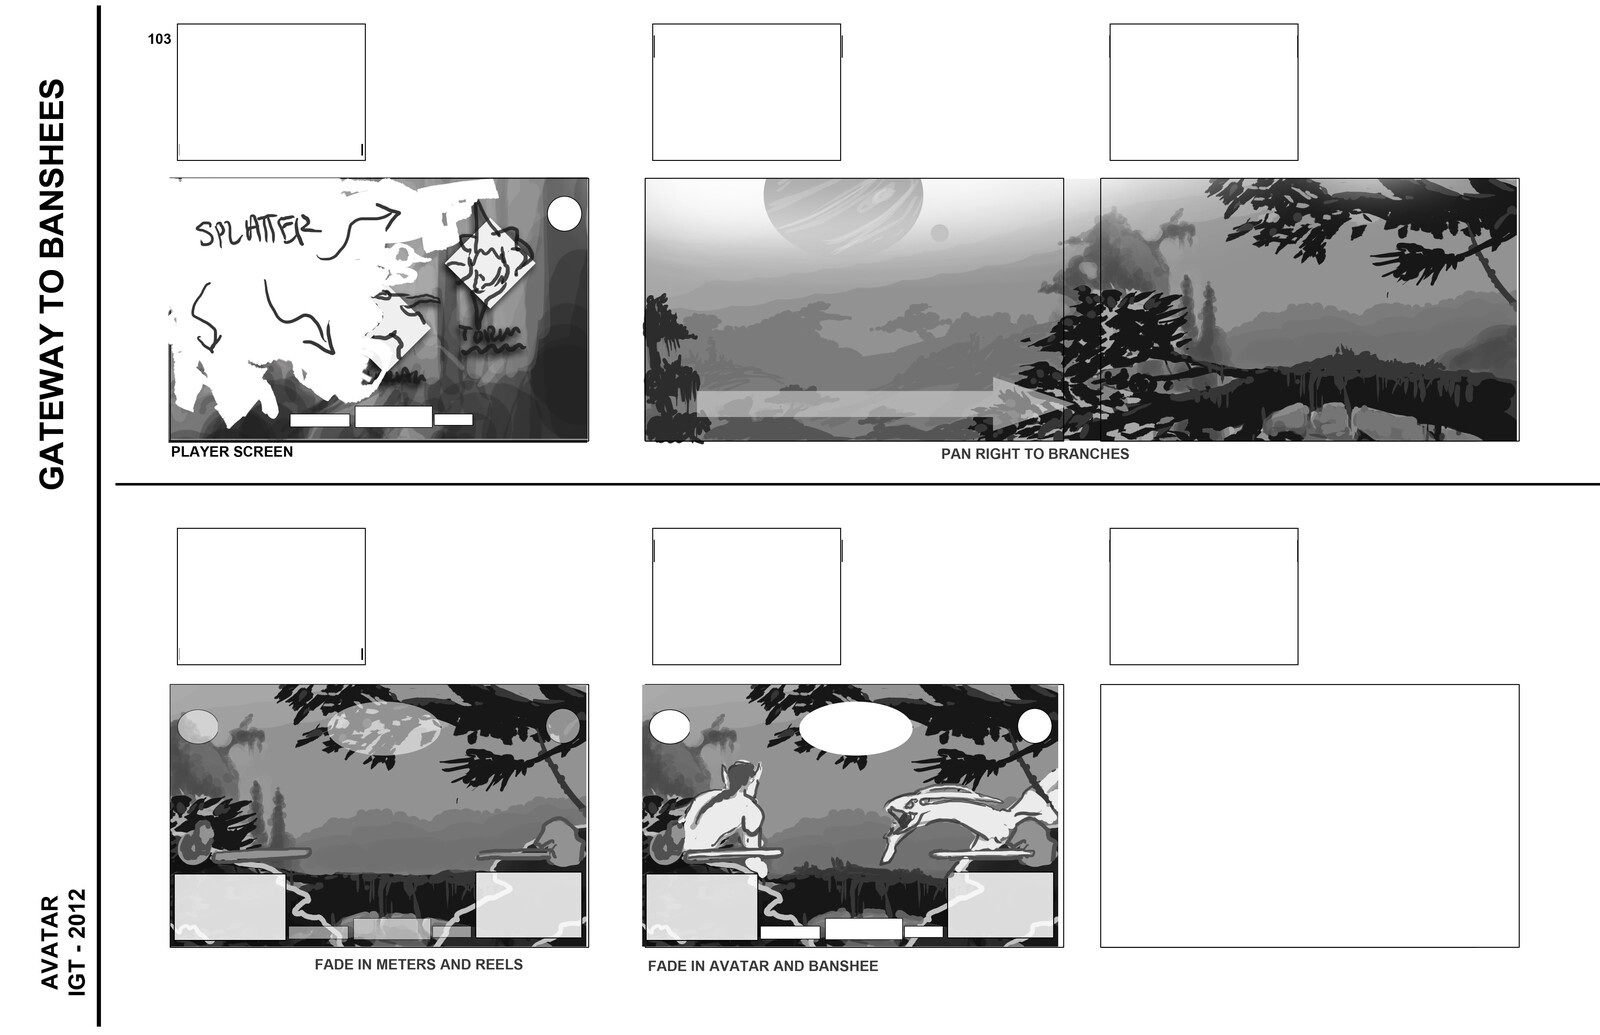 Storyboards showing the Player screen when a bonus was triggered. These were to help guide the 3D artist with camera moves and timing.